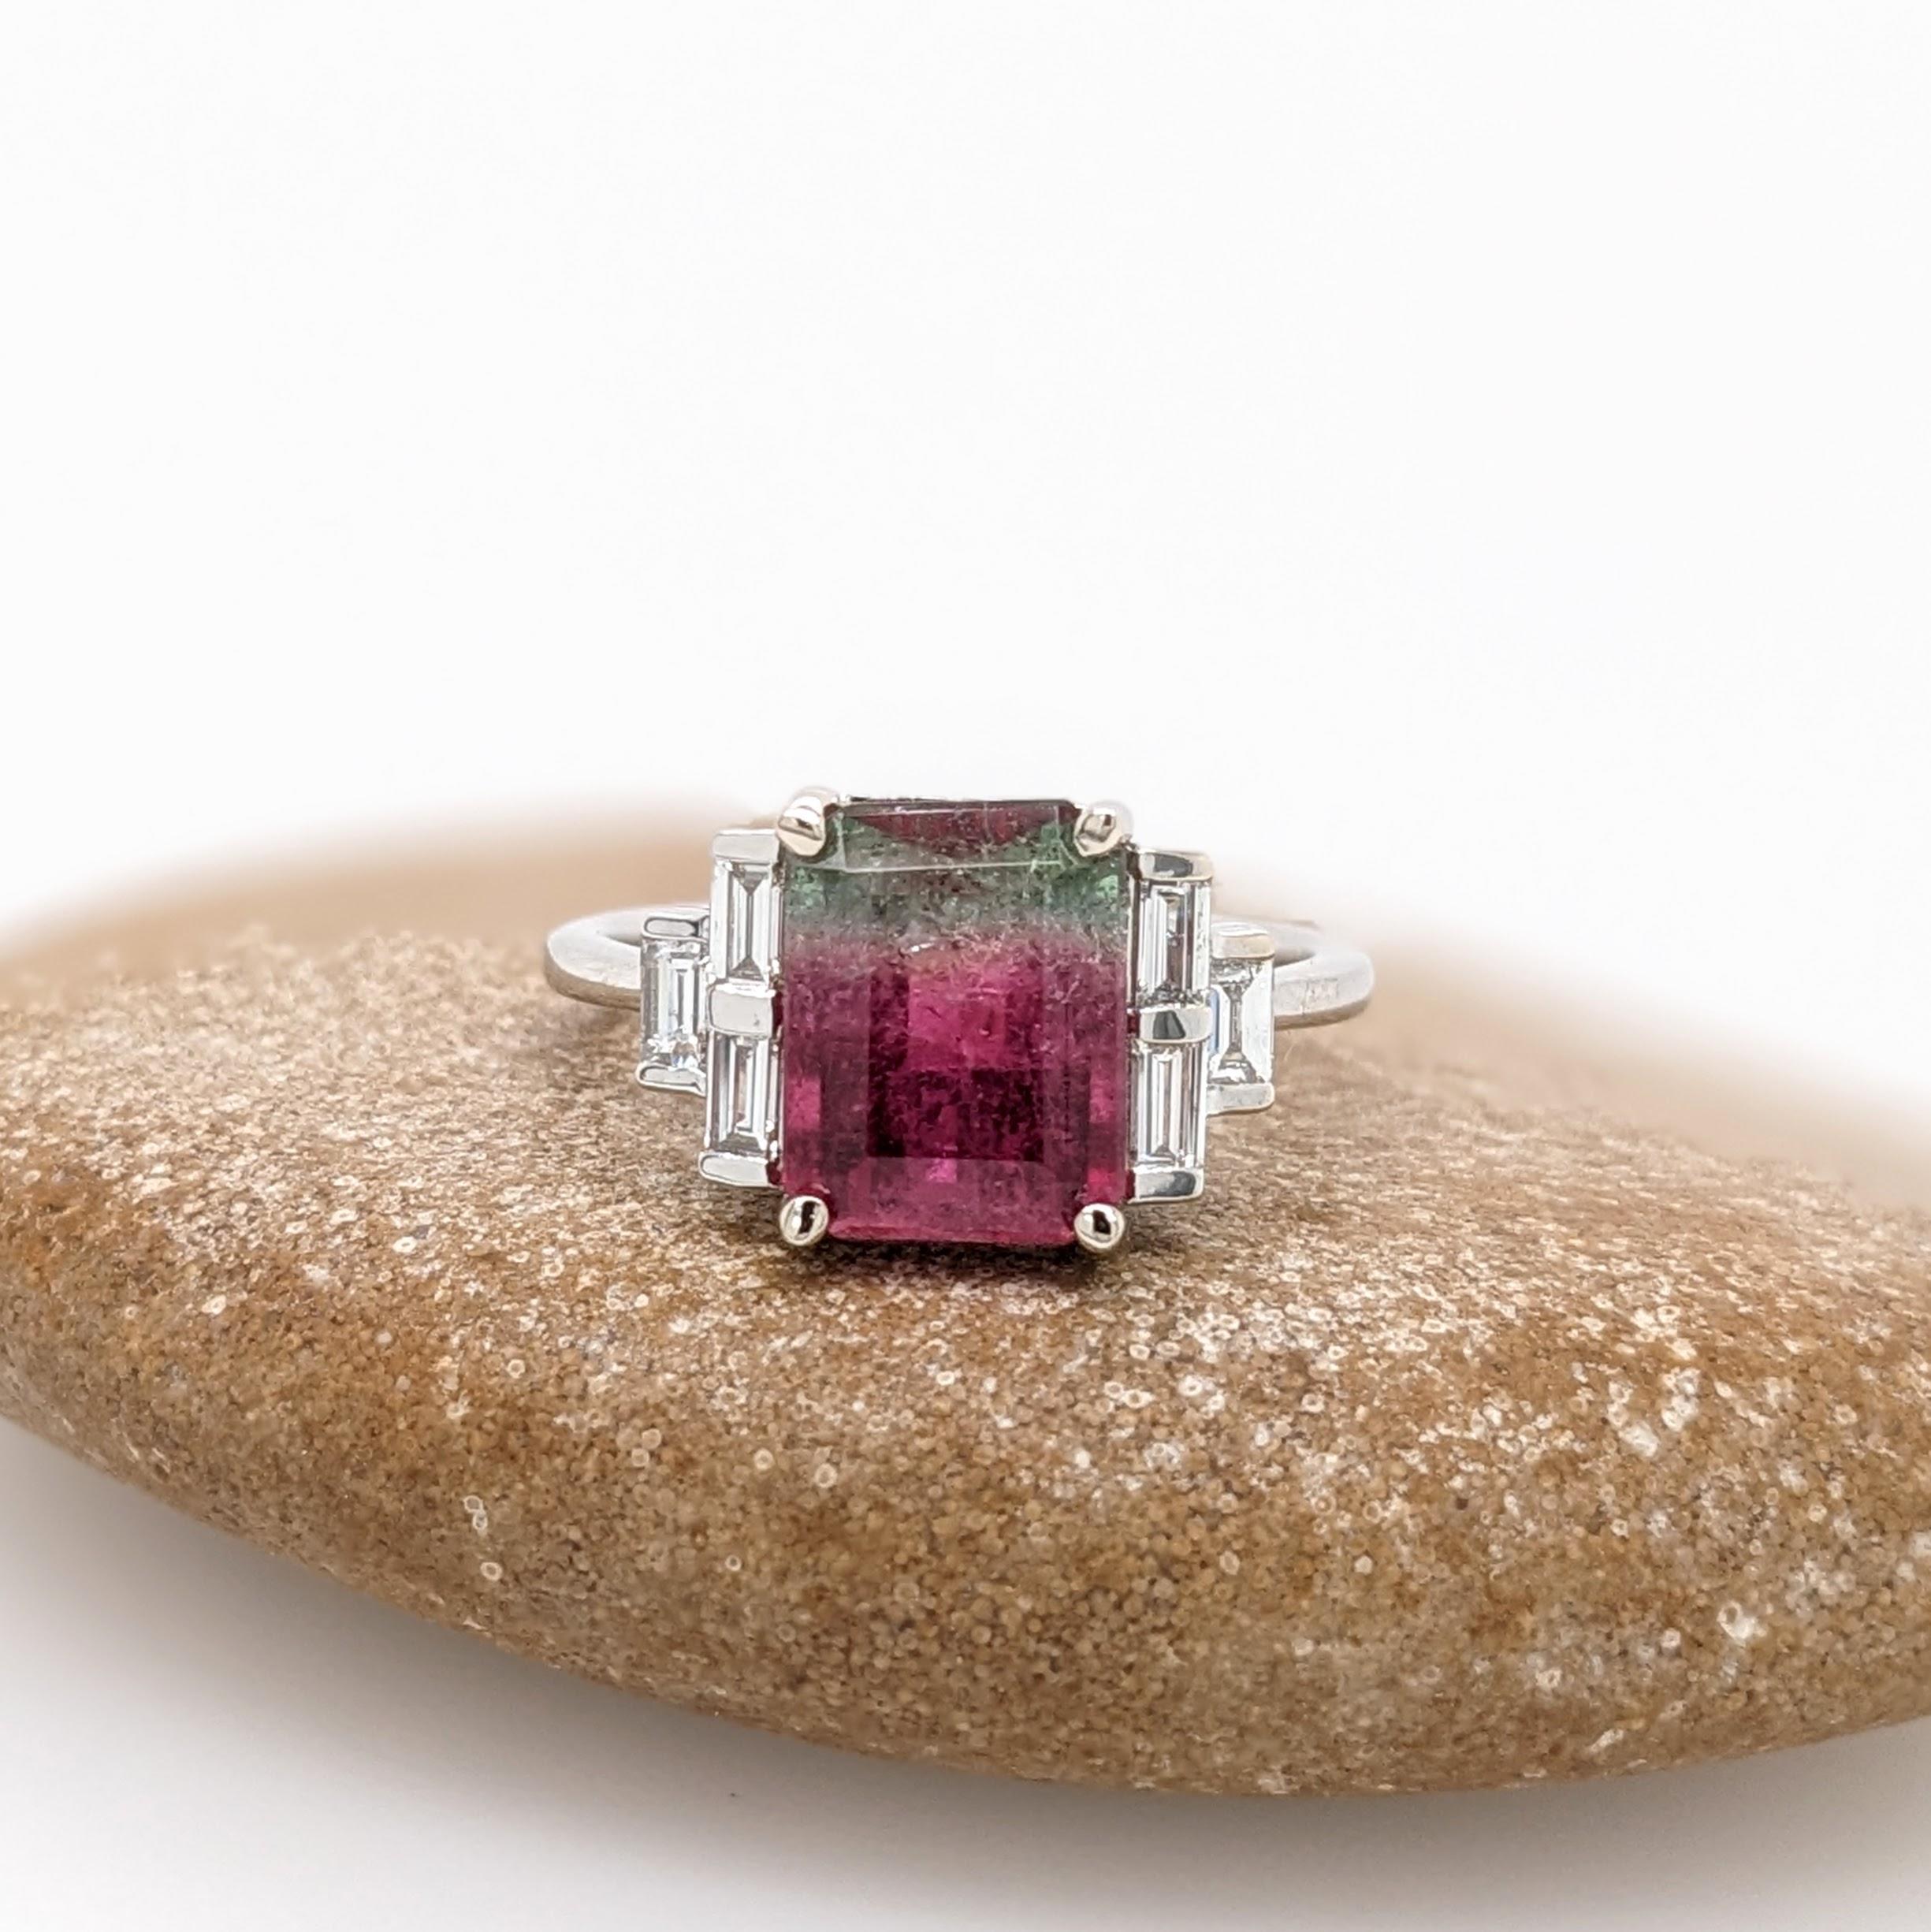 This ring features a beautiful pink and green watermelon Tourmaline with gorgeous saturated hues. It is set with sparkling natural diamond accents in 14k white Gold. A gorgeous statement ring to showcase this unique stone!

Specifications

Item